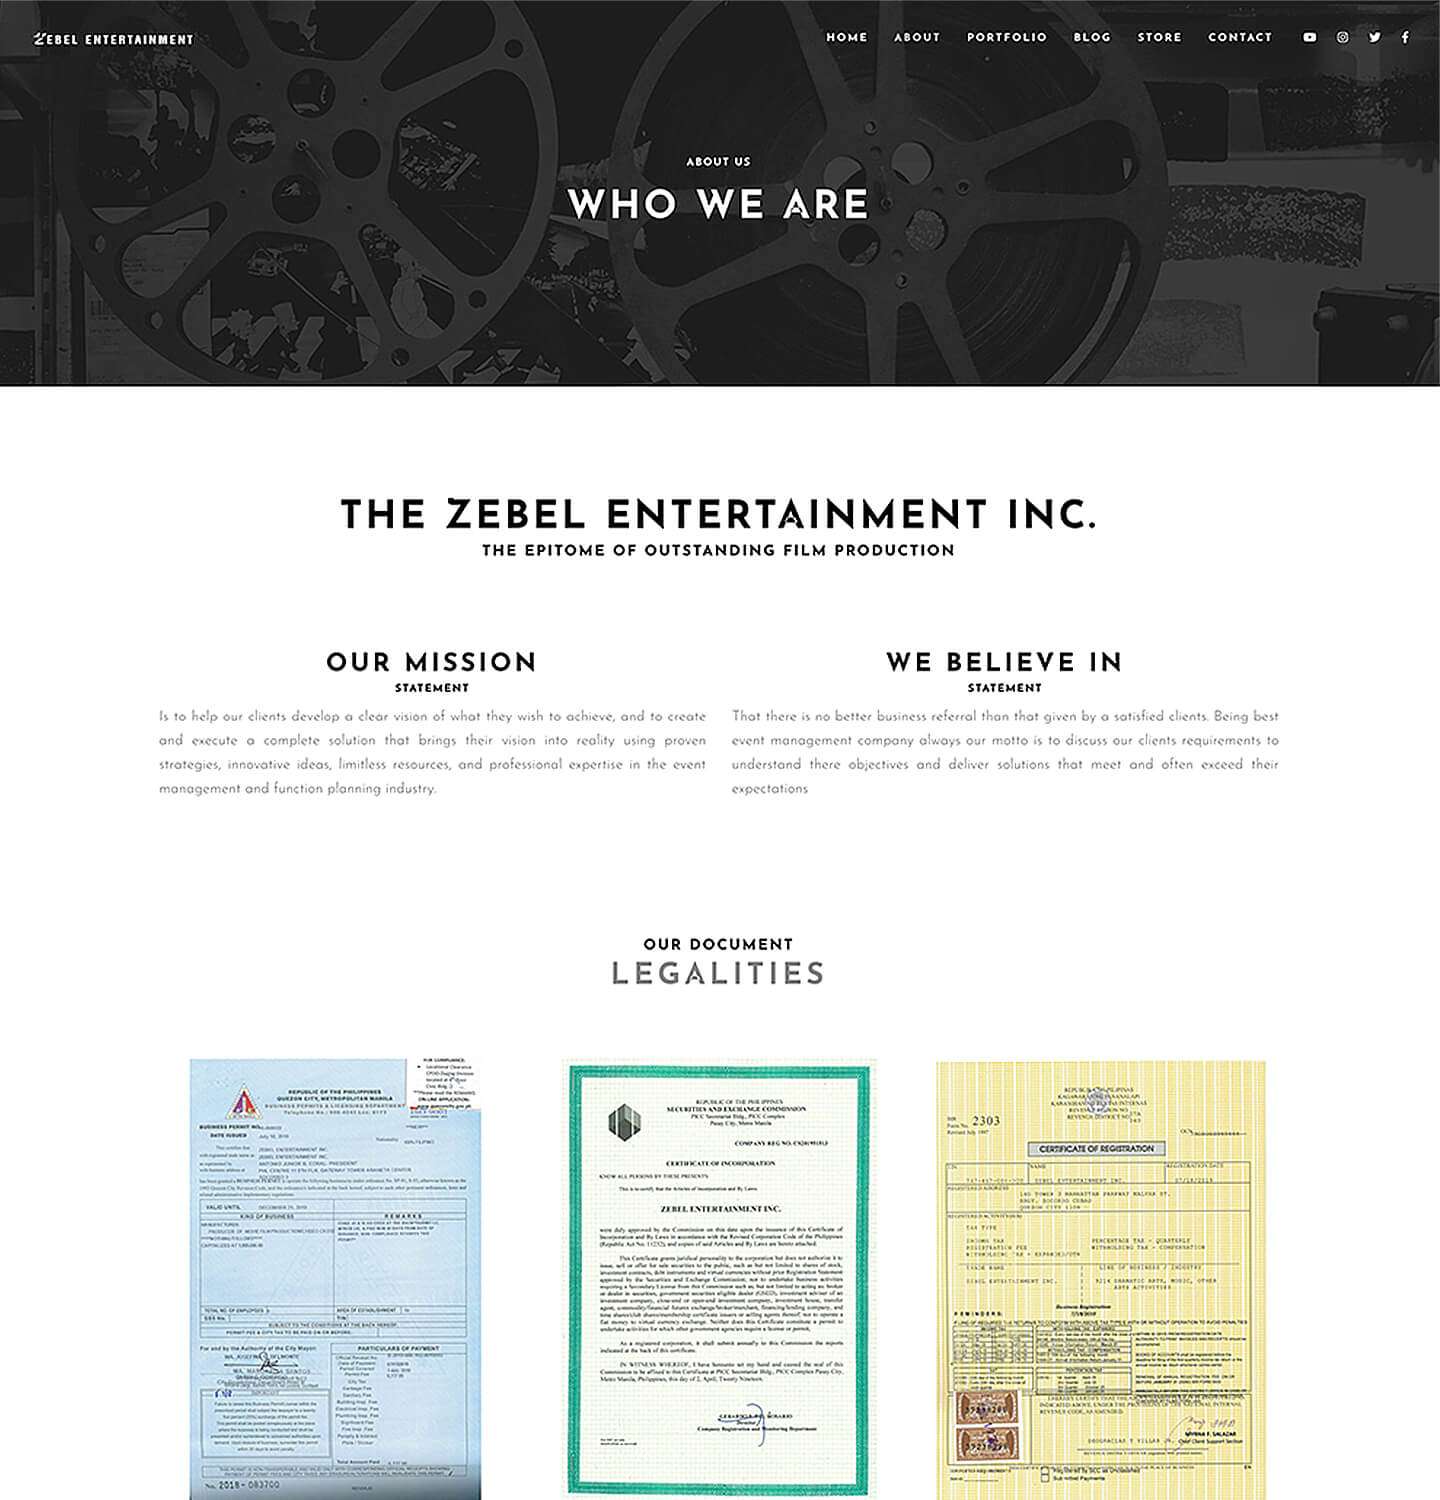 Zebel - who we are